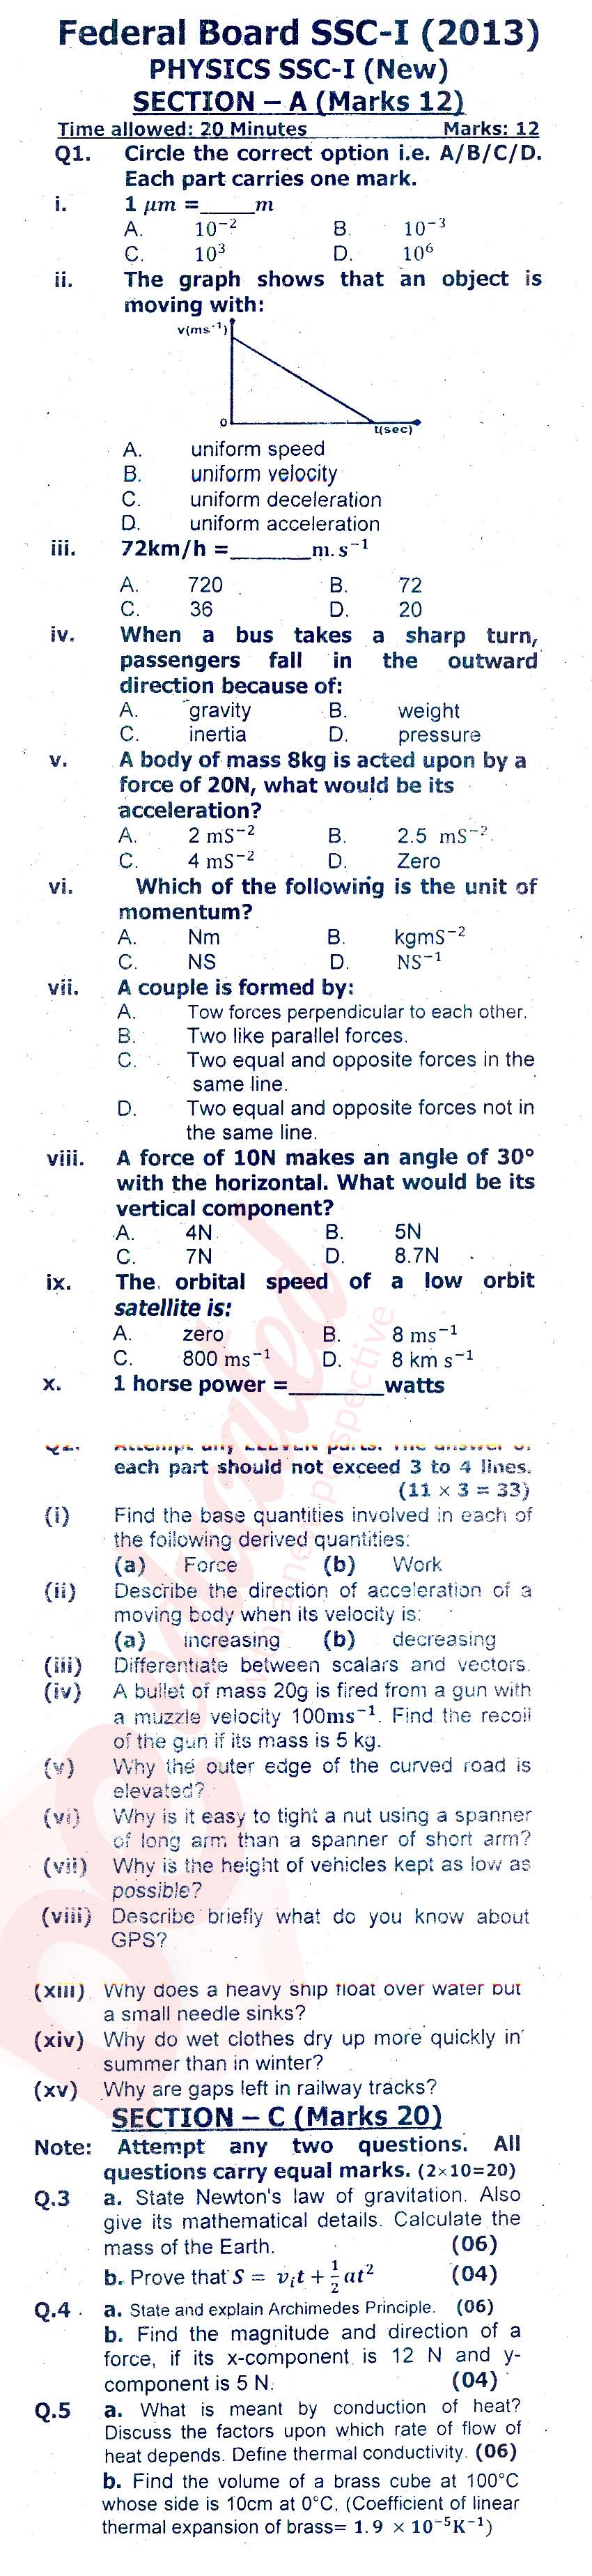 Physics 9th class Past Paper Group 1 Federal BISE  2013